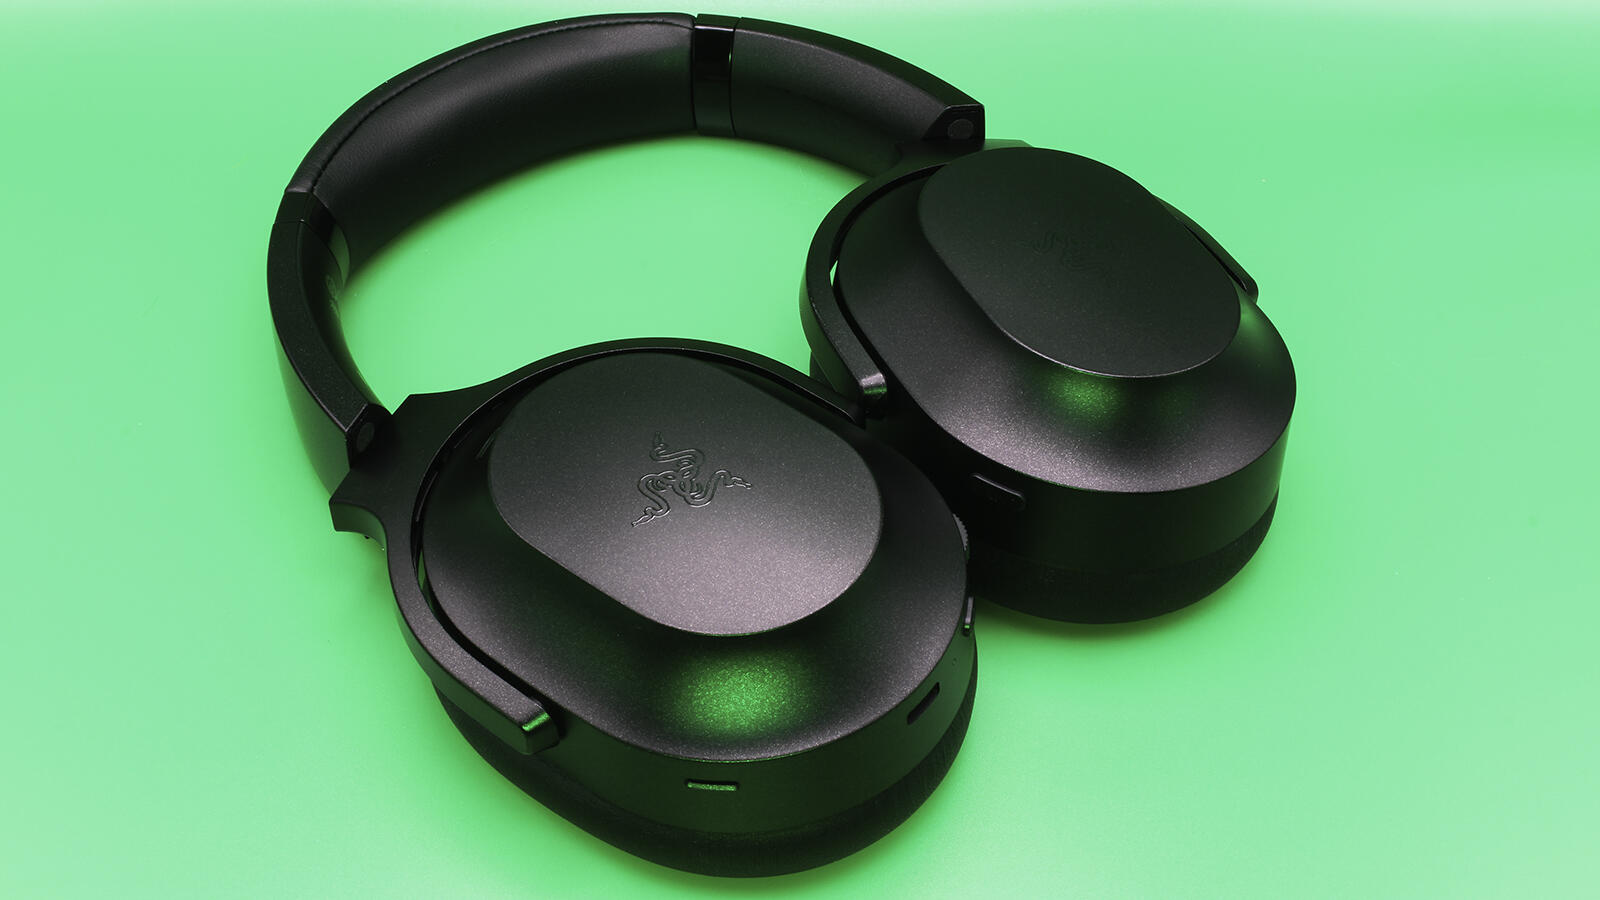 Razer Barracuda Pro Wireless Gaming Headset Review: The Edge of